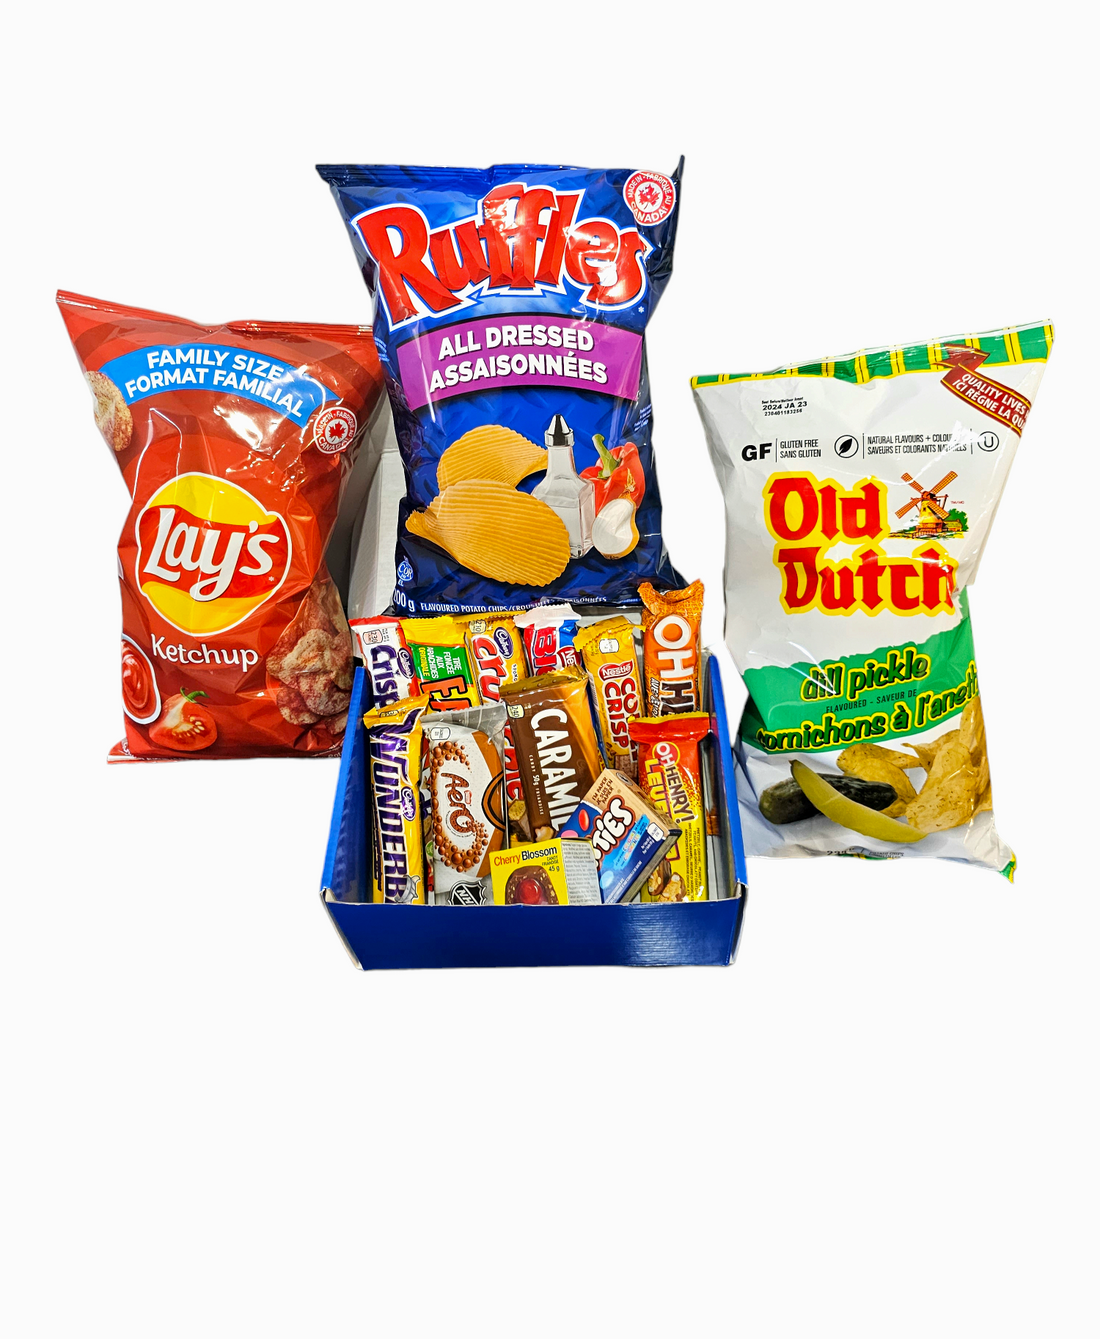 Canadian snack box with large chips! Lays Ketchup, Ruffles All Dressed and Old Dutch Dill Pickle